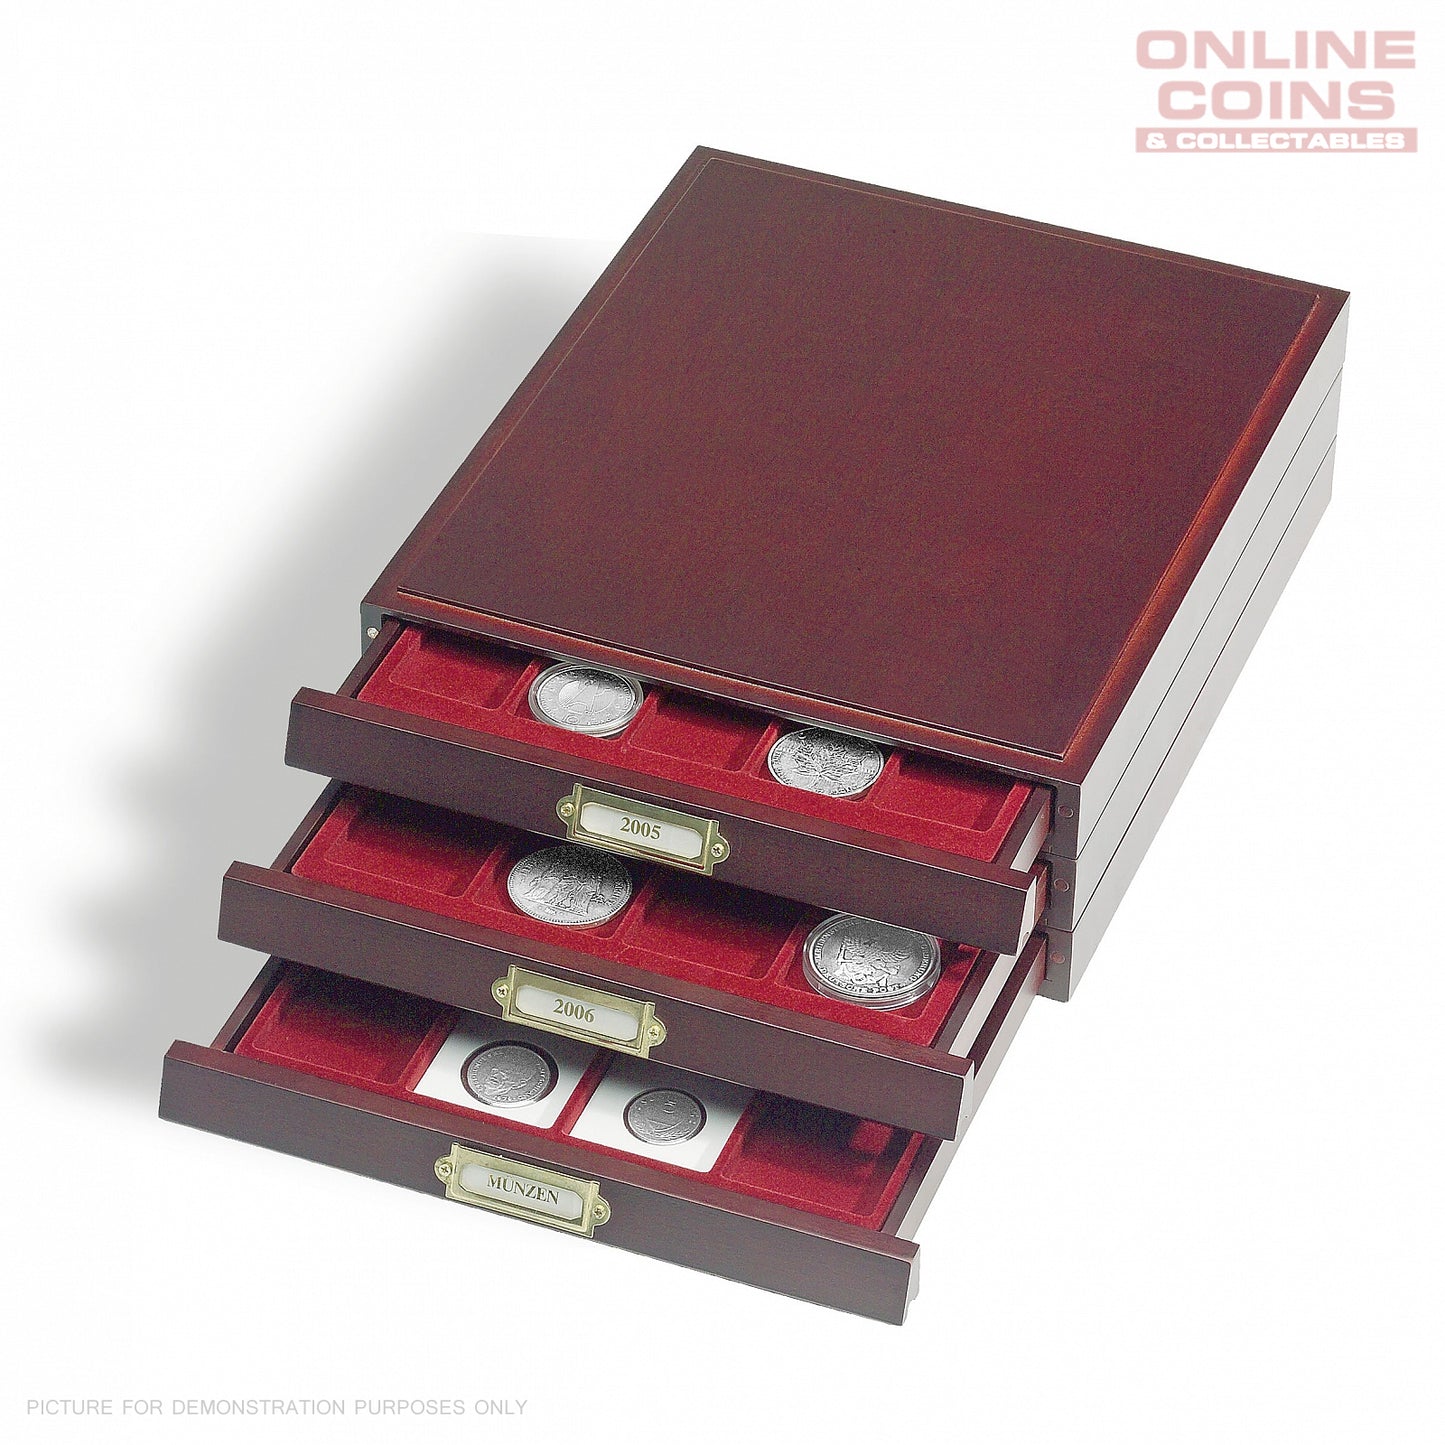 LIGNUM Coin Drawer - 35 Square Compartments Up To 35mm